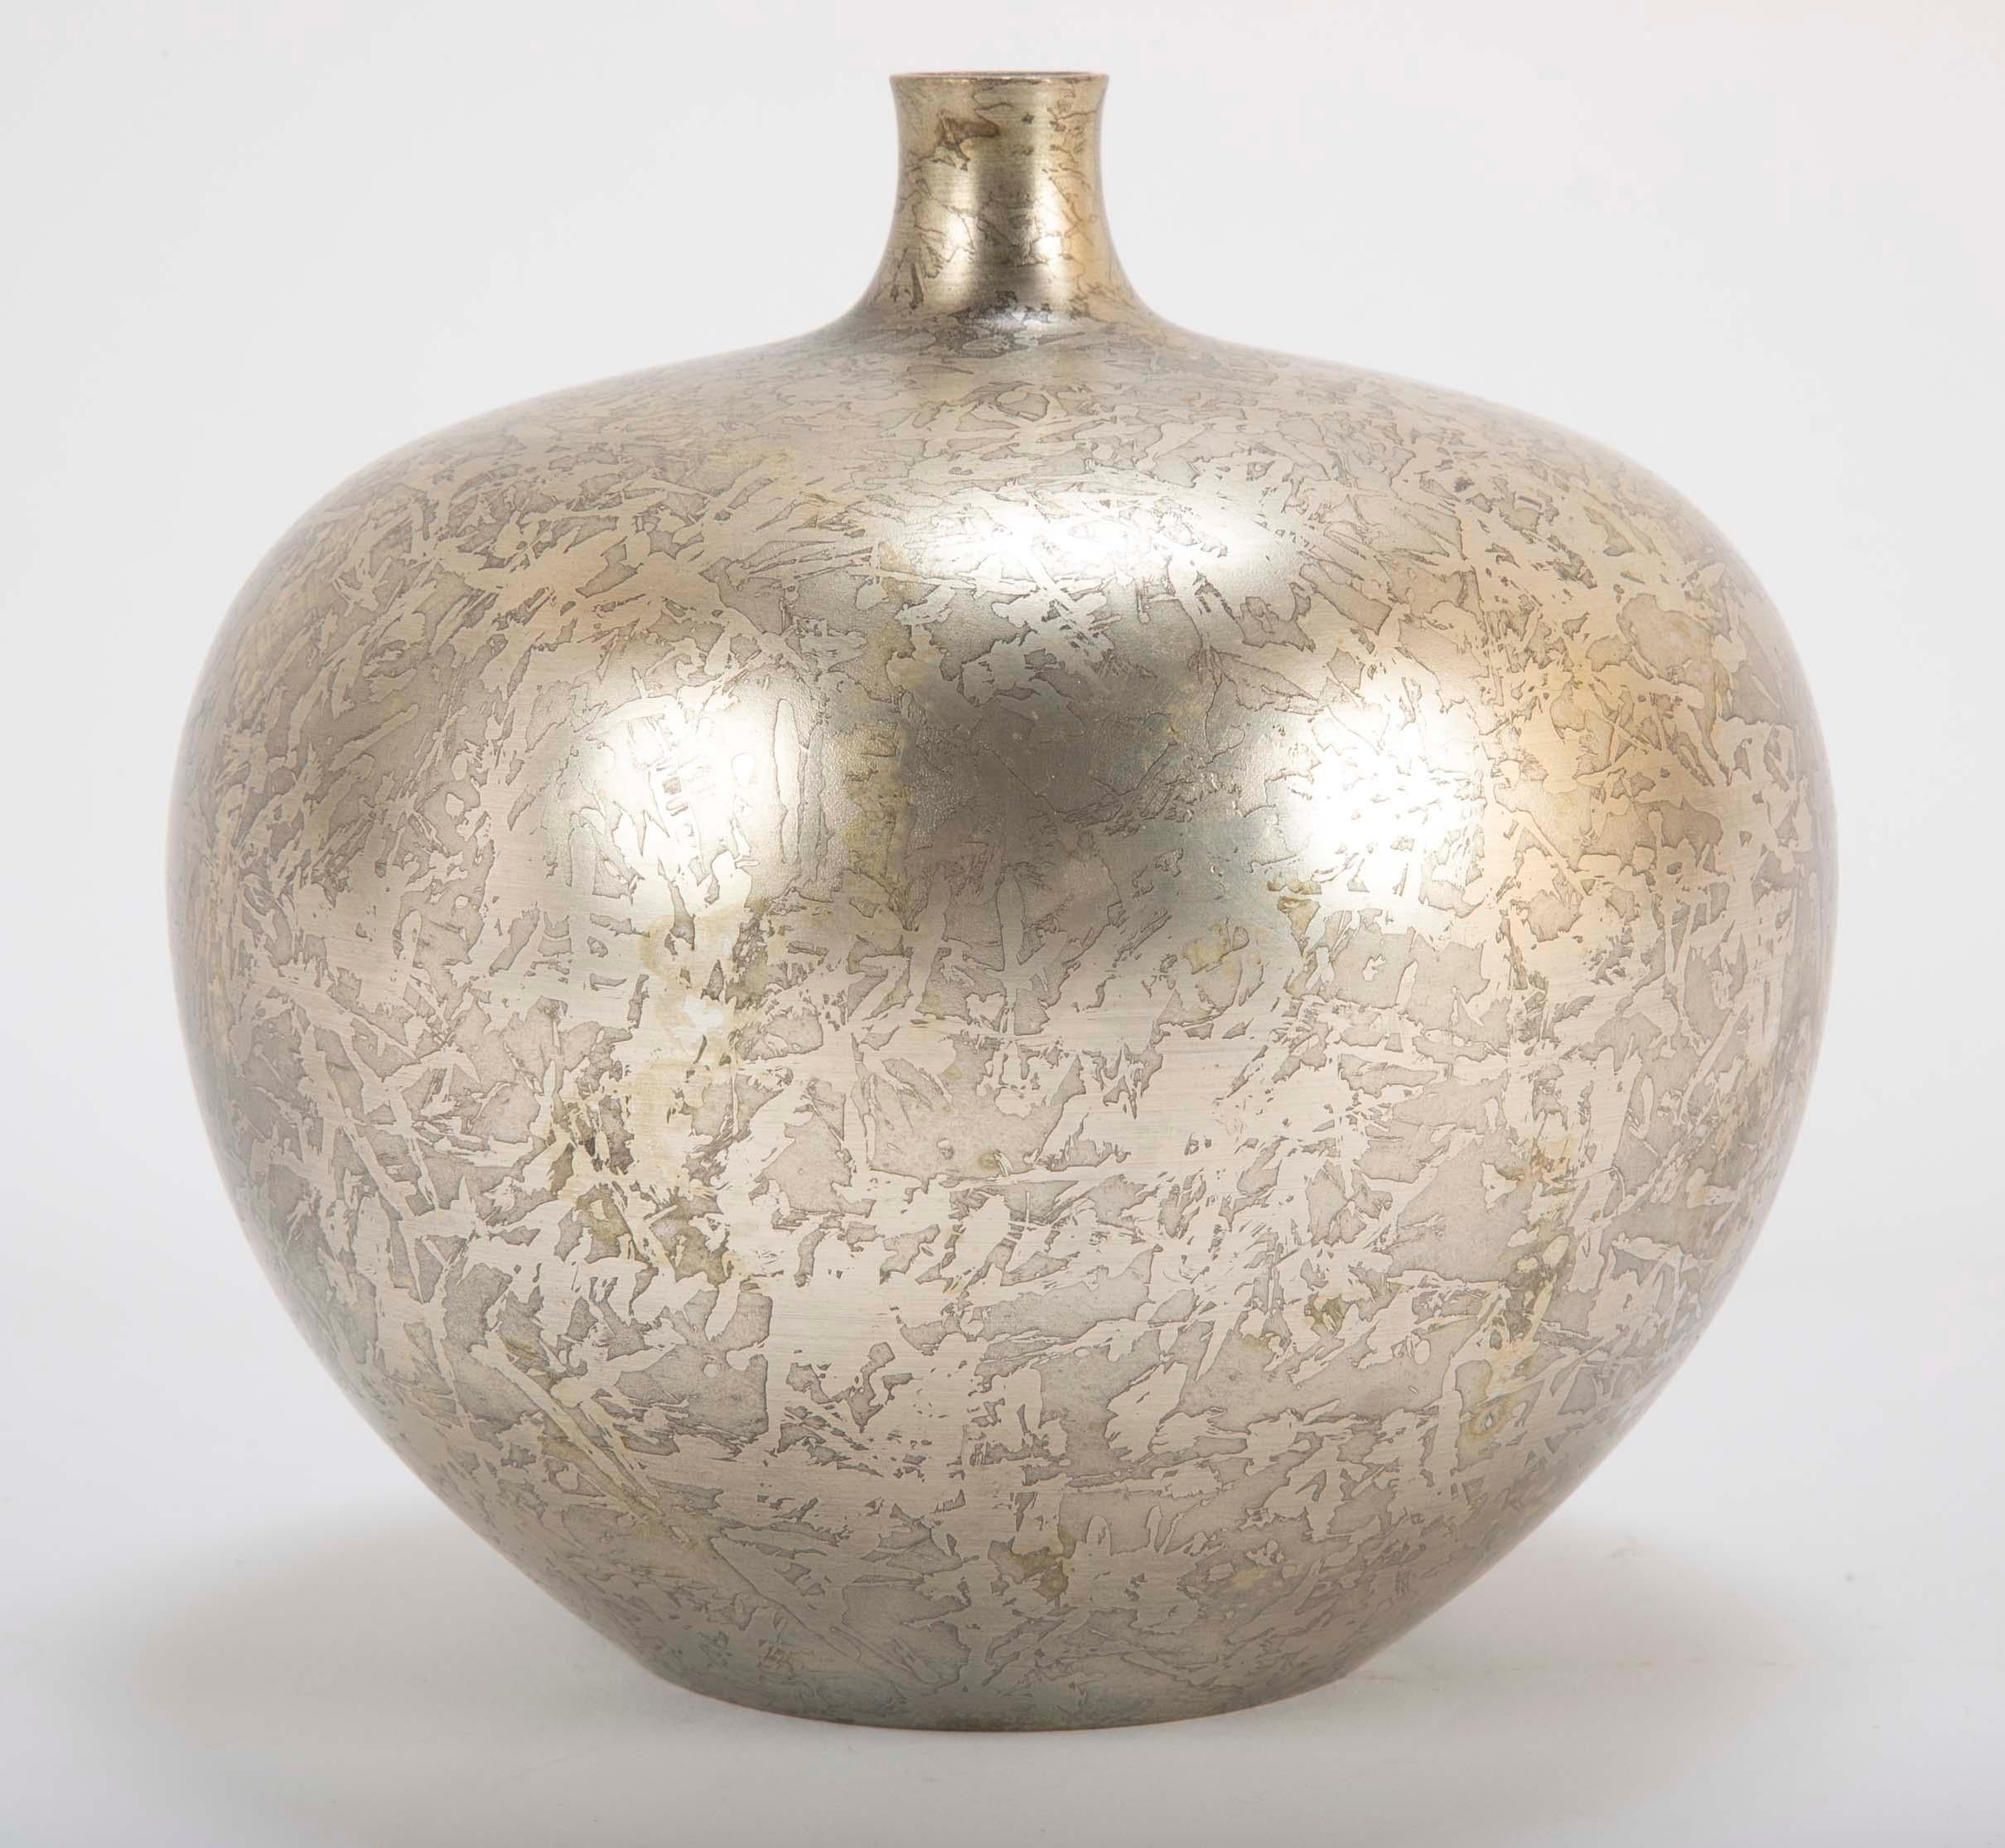 A Japanese silver overlay vase with textured finish. Singed with Fuku mark to underside. Vases is sold with Tomobaco (wooden storage box with signature and title). Vase has no dents or scratches.